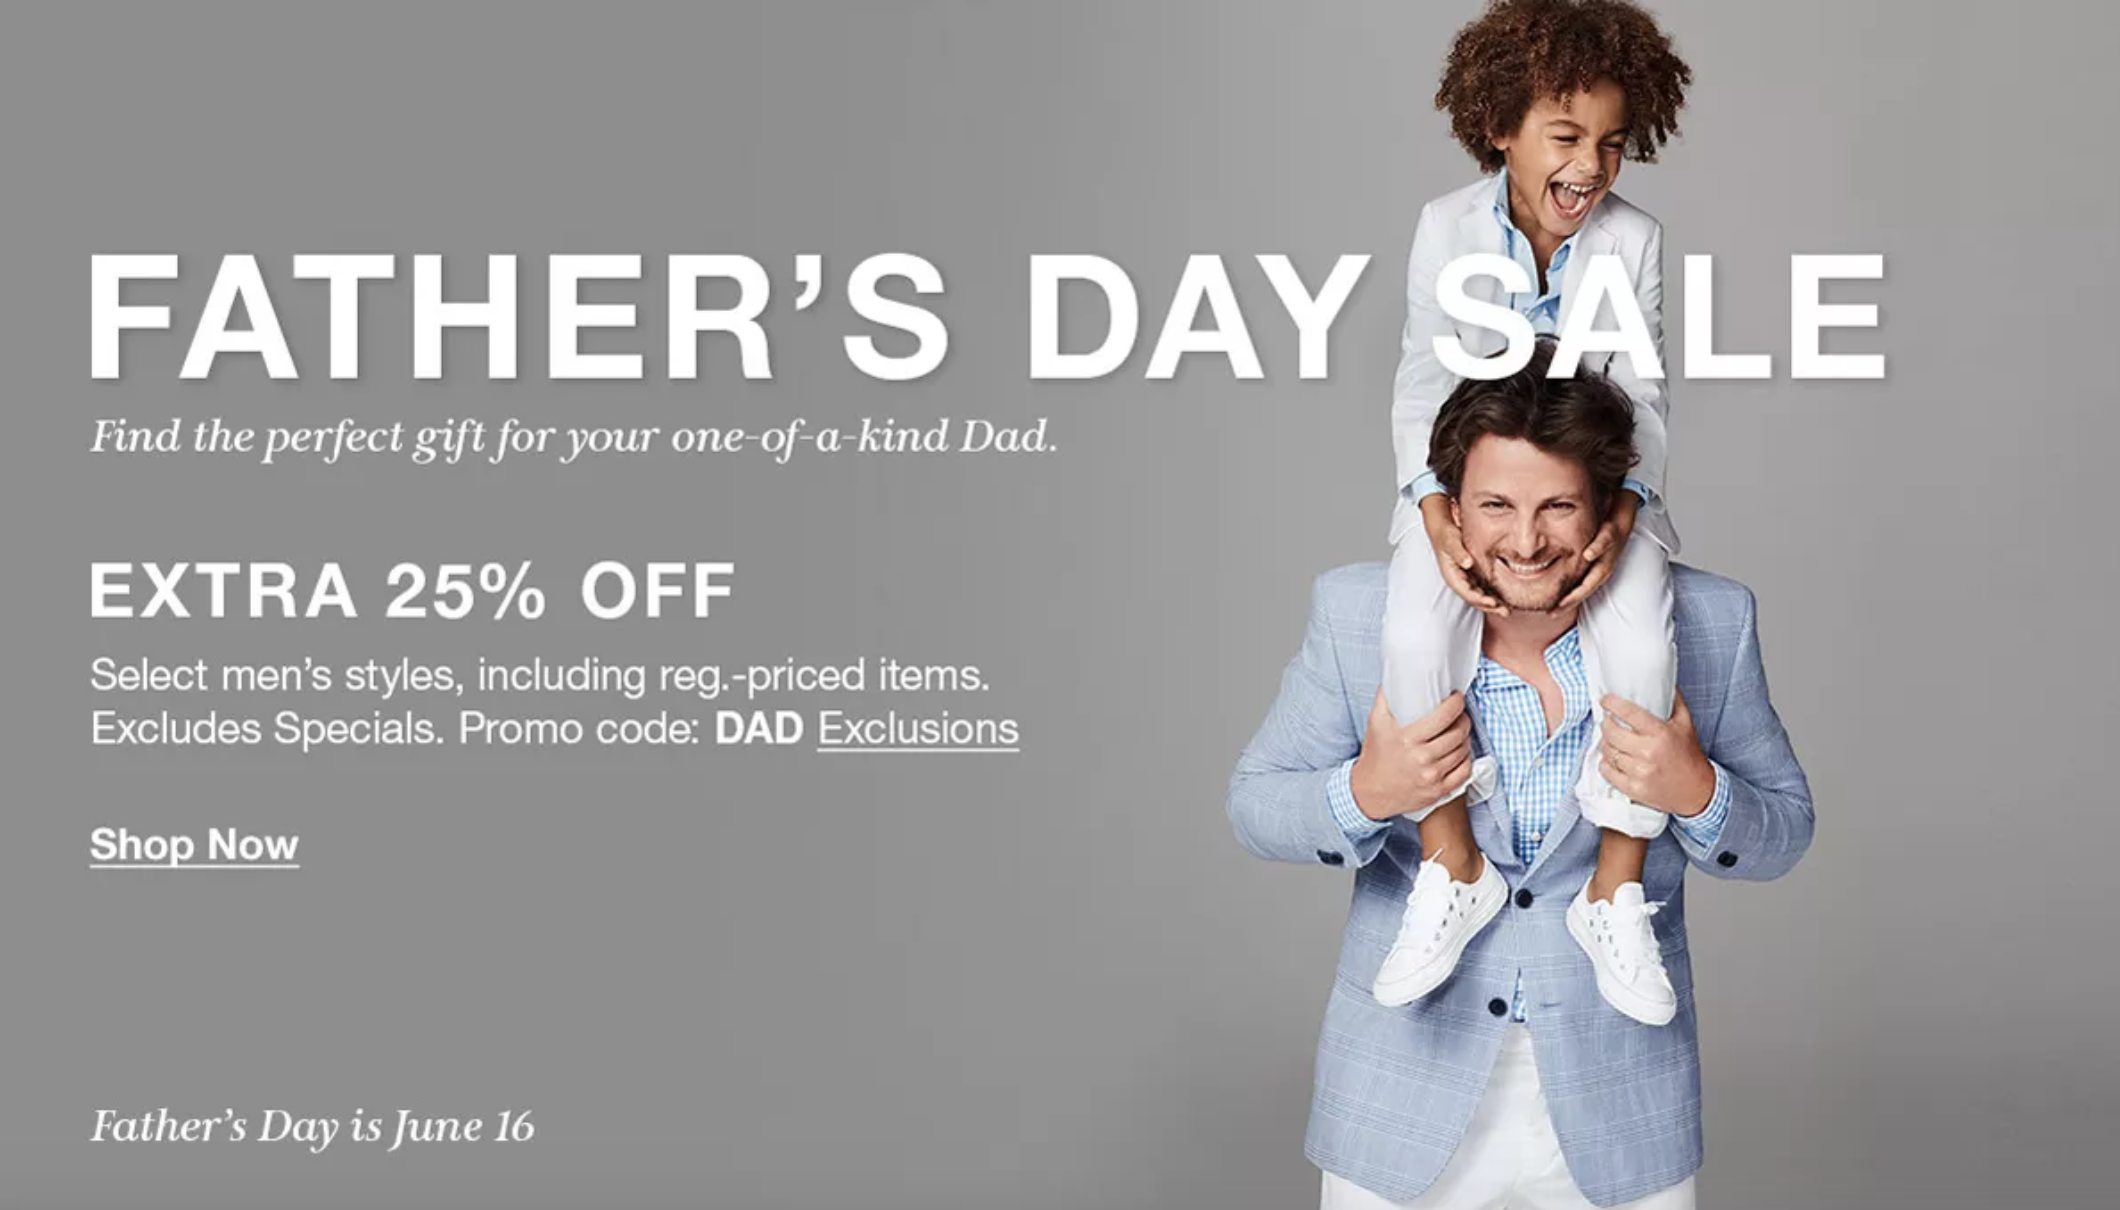 Macy's Father's Day Sale - Magic Style Shop